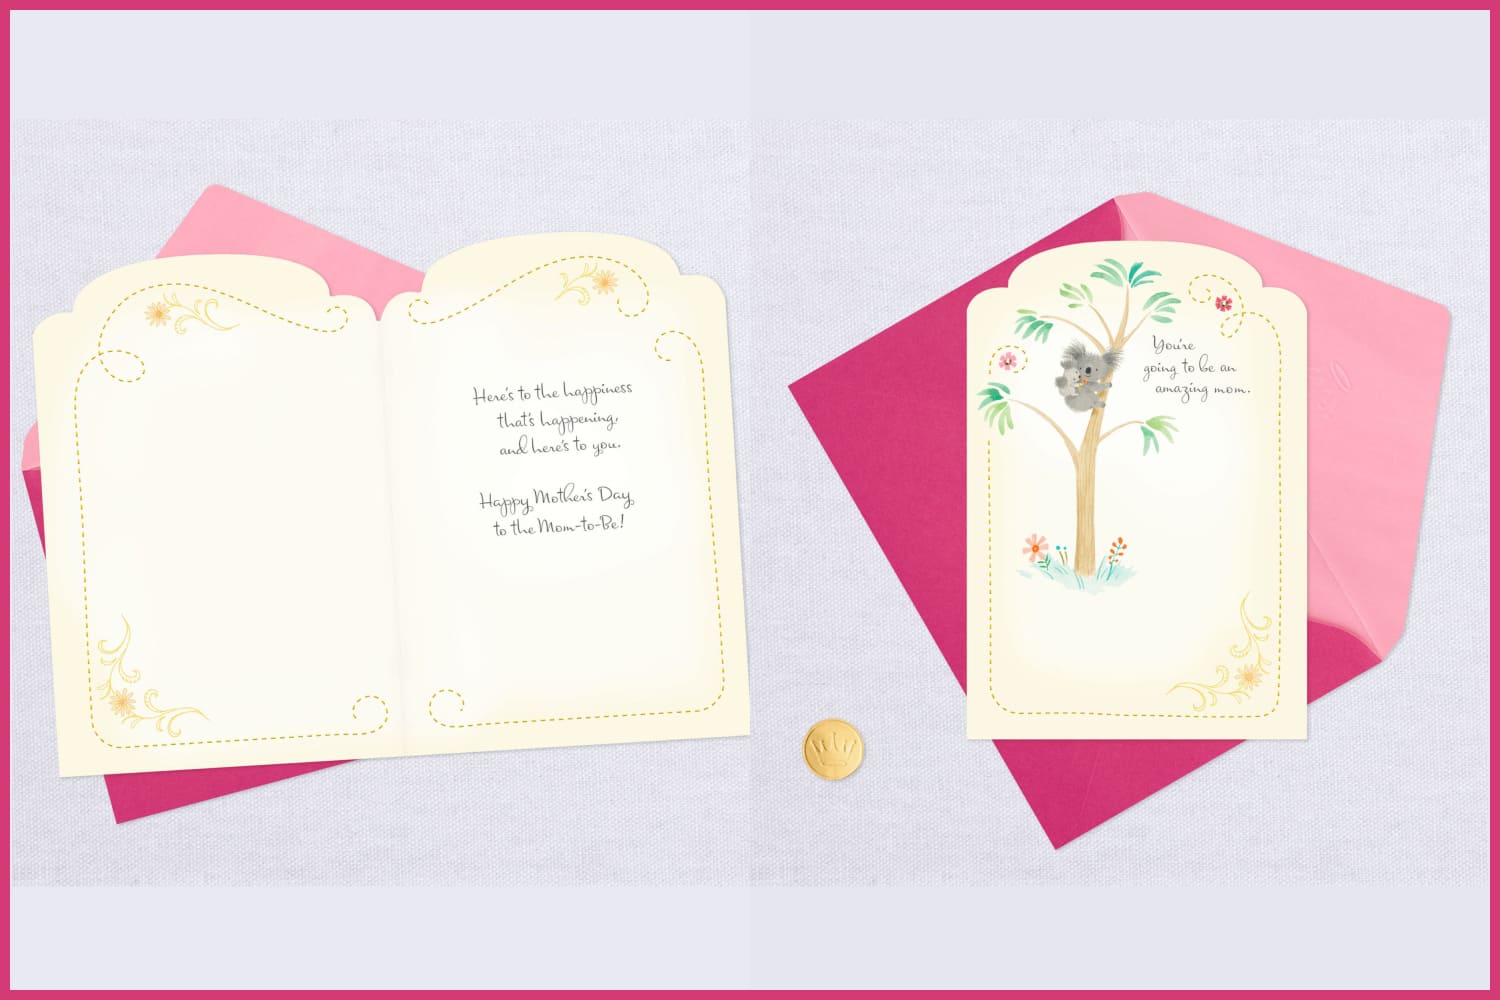 Photo of Mother's Day cards with Koala on wood and text.